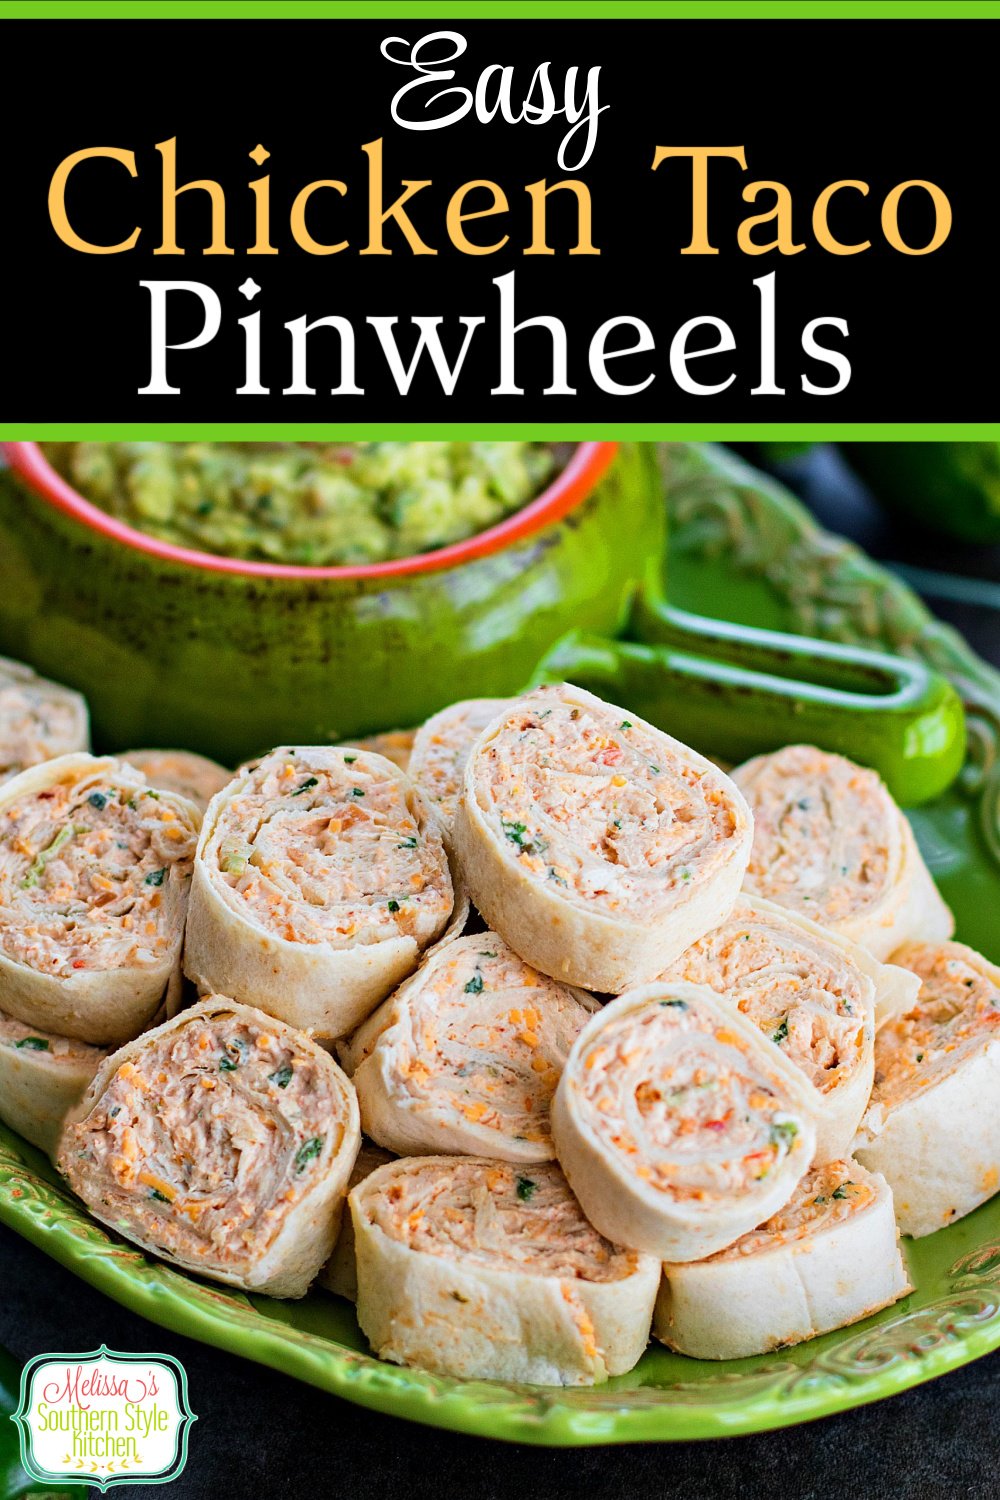 Serve-up a big platter of these Chicken Taco Pinwheels for appetizers, game day snacks or holiday parties #chickentacos #chickentacopinwheels #easychickenrecipes #appetizers #chickenpinwheels #gamedaysnacks #tacos #partyfood #southernrecipes #southernfood #chicken via @melissasssk